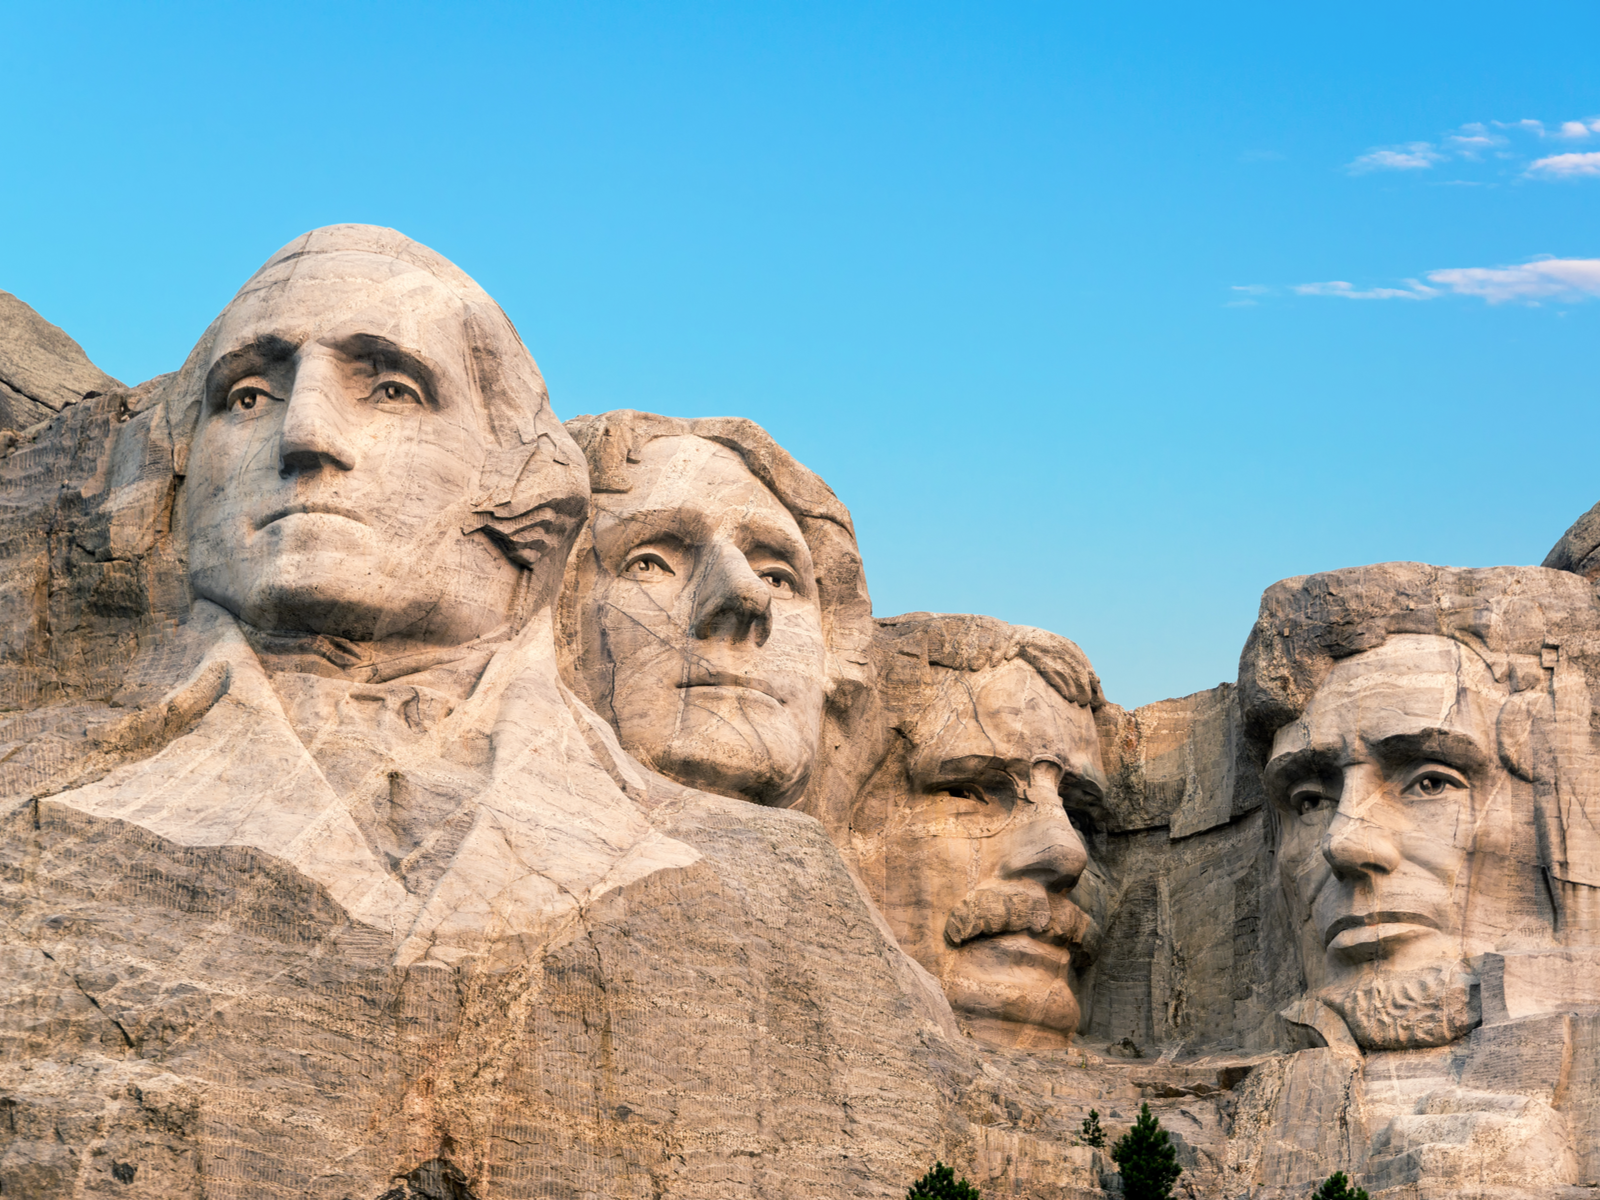 A gigantic sculpture on faces of the four famous US presidents on Mount Rushmore National Memorial in South Dakota, a piece on the most iconic places in America